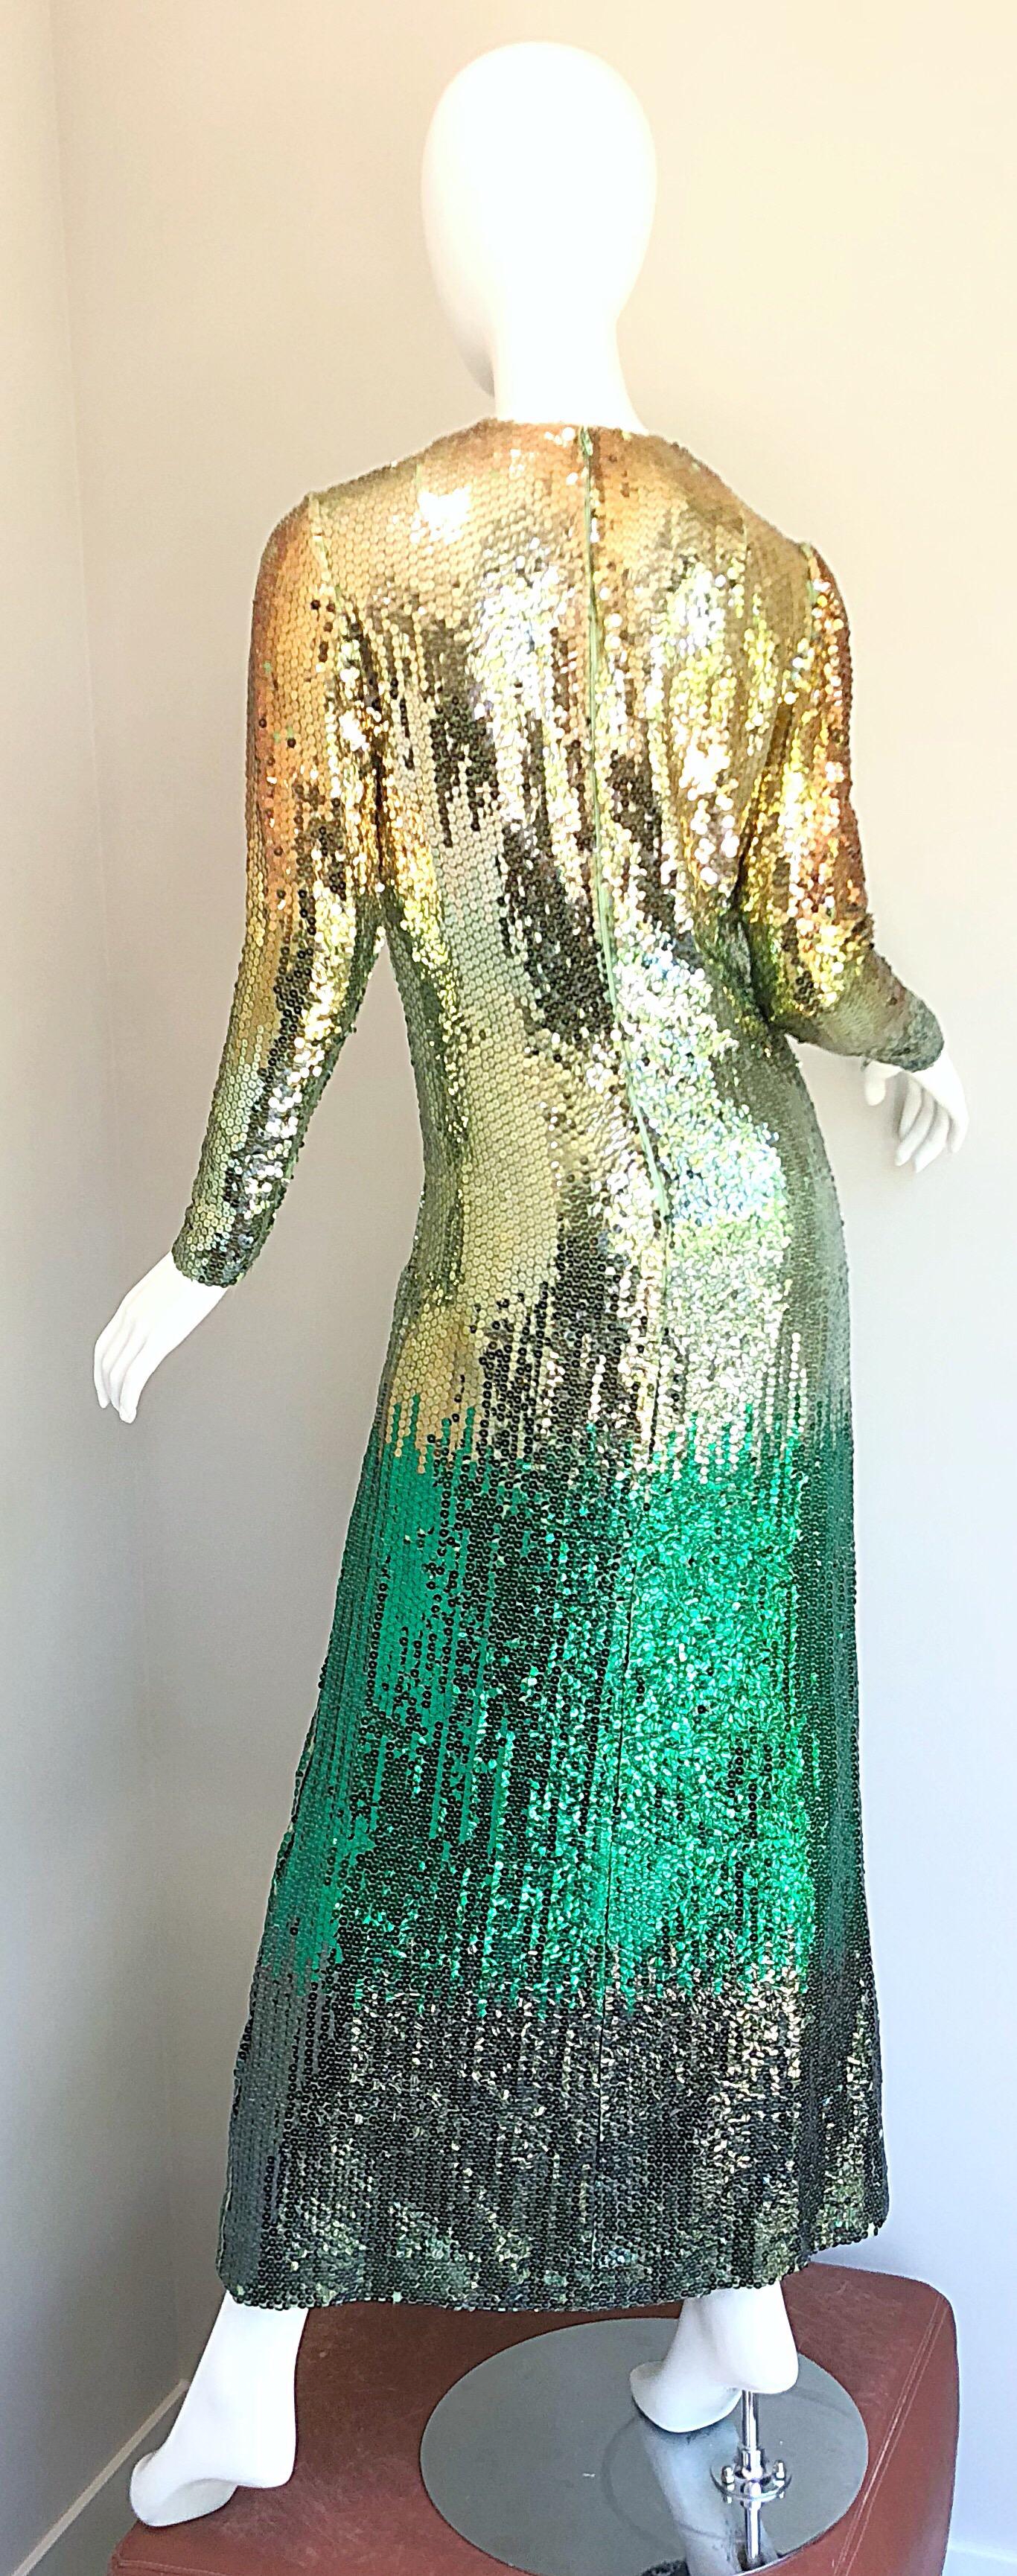 Amazing 1960s Bill Blass Gold + Green Ombre Sequined Vintage 60s Gown Dress 5